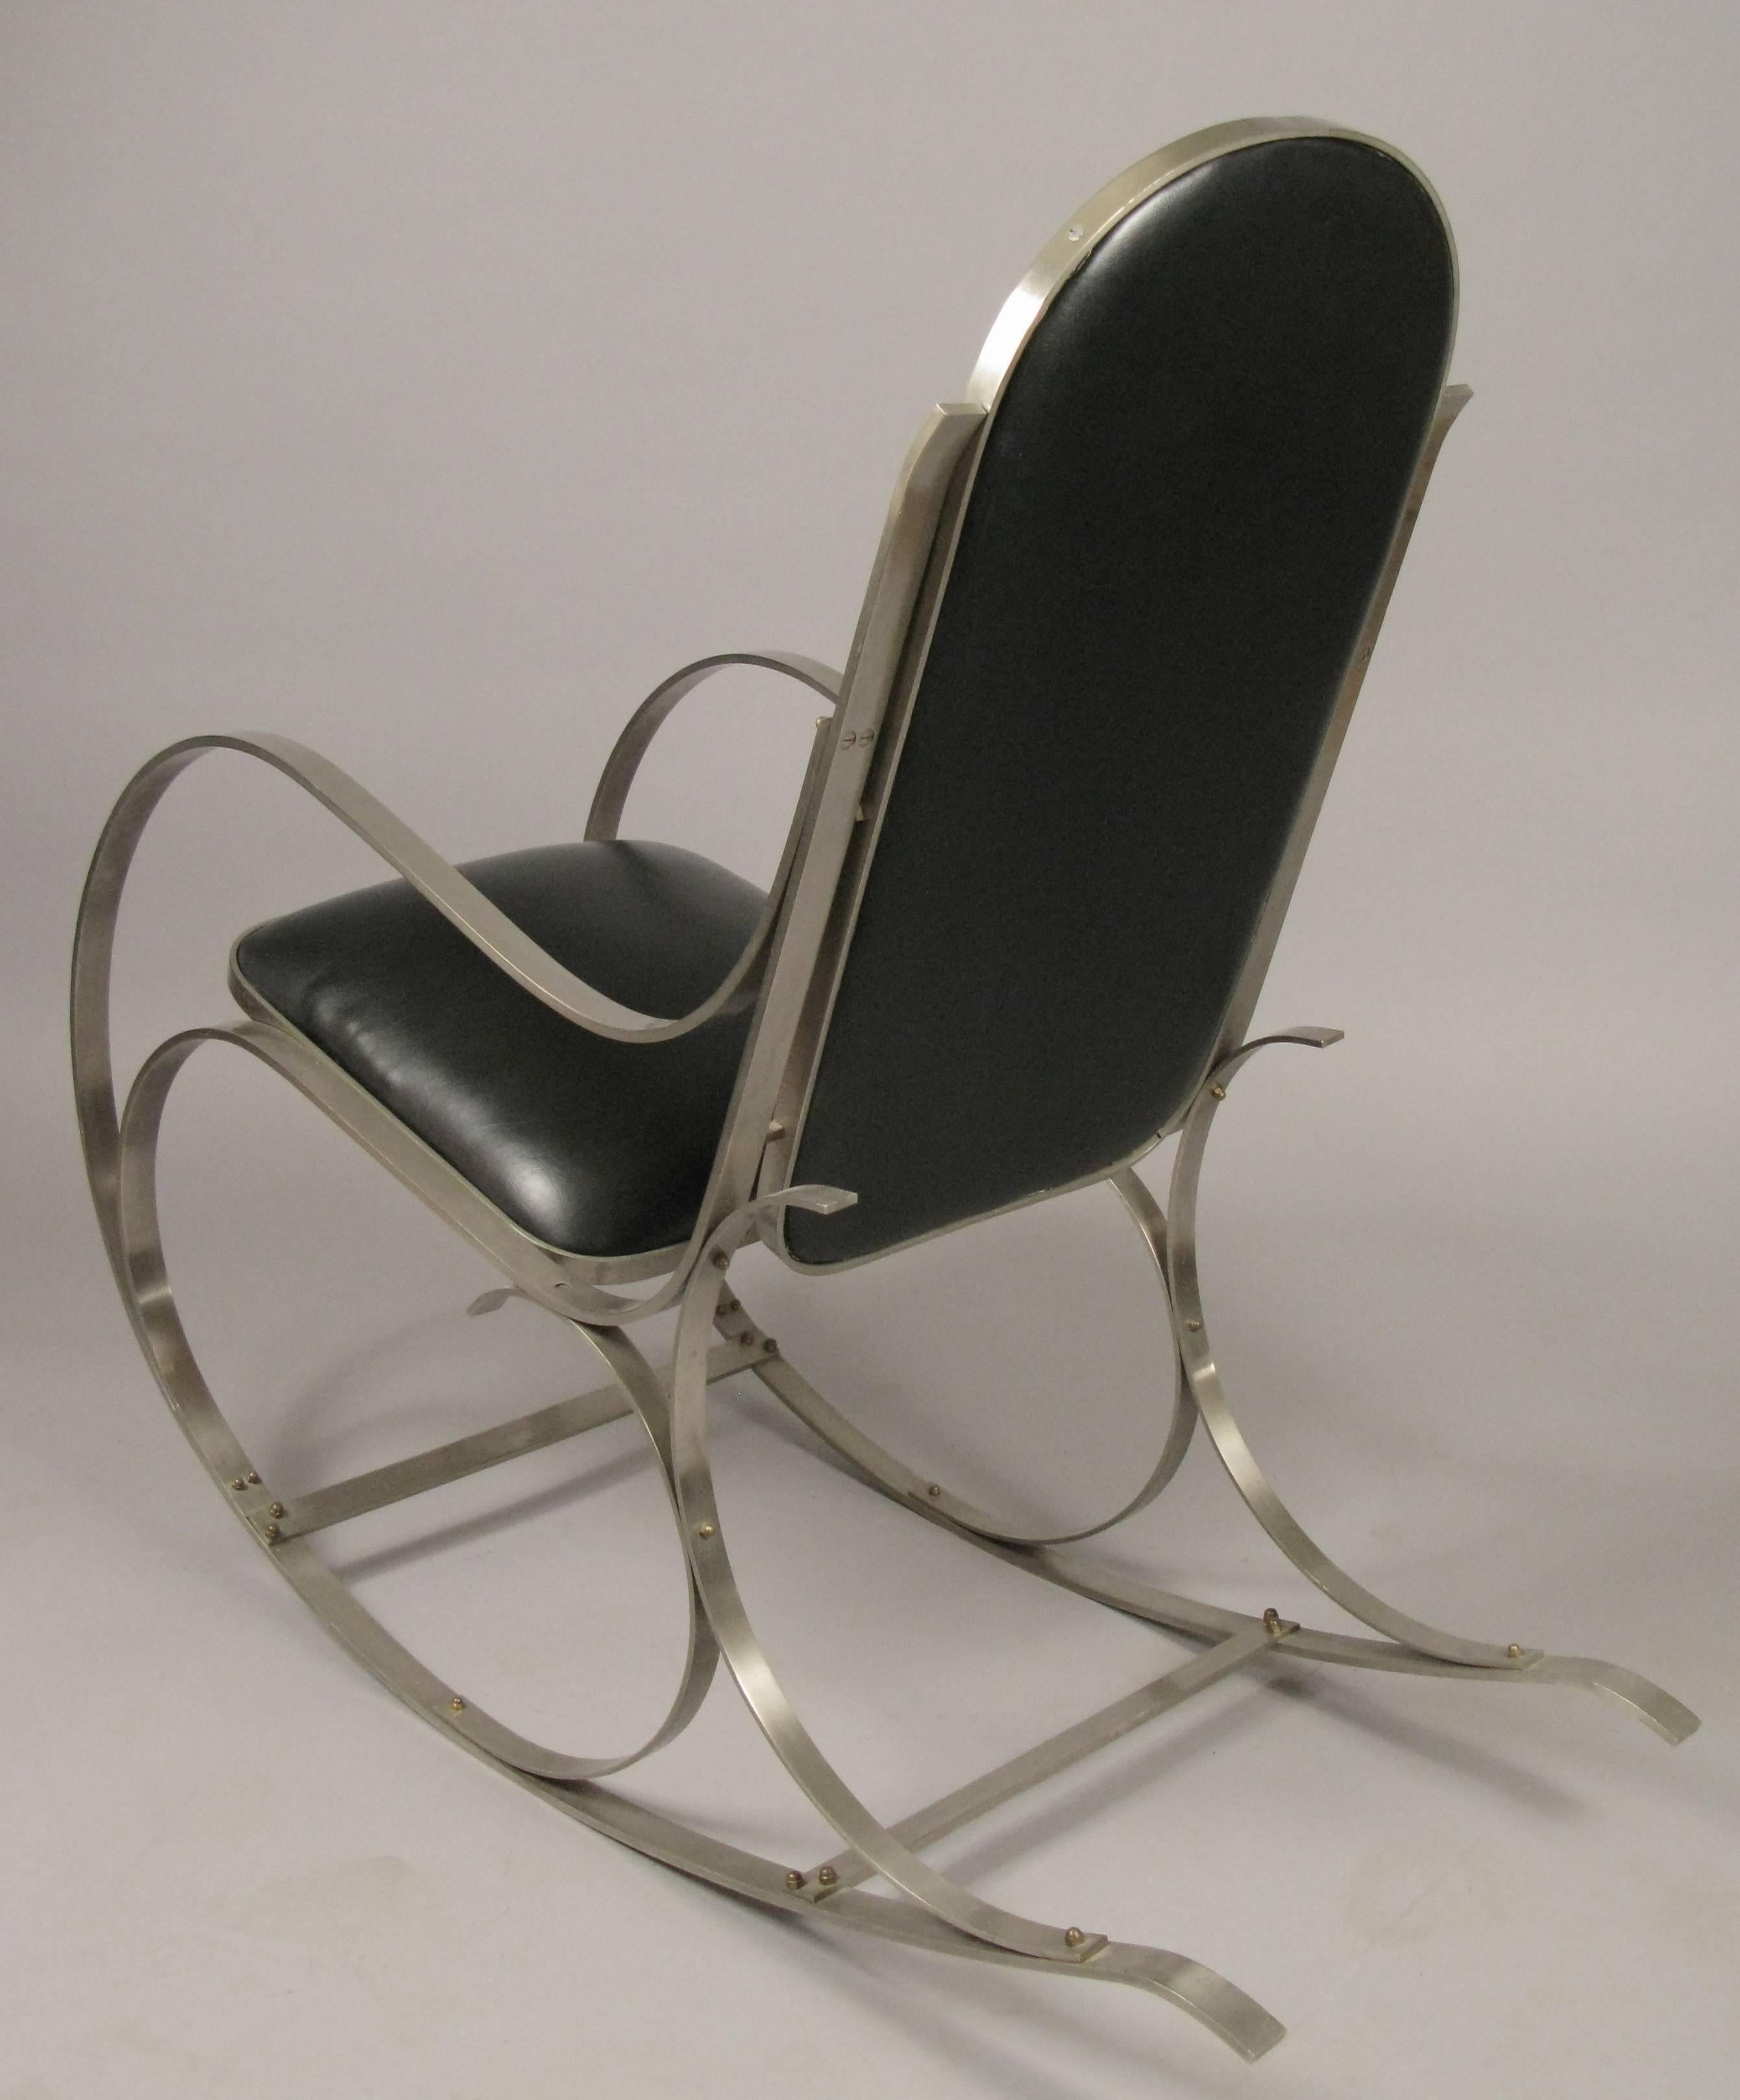 An incredibly well made vintage 1970s brushed steel frame rocking chair. Stamped 'made in Italy'. Excellent condition.